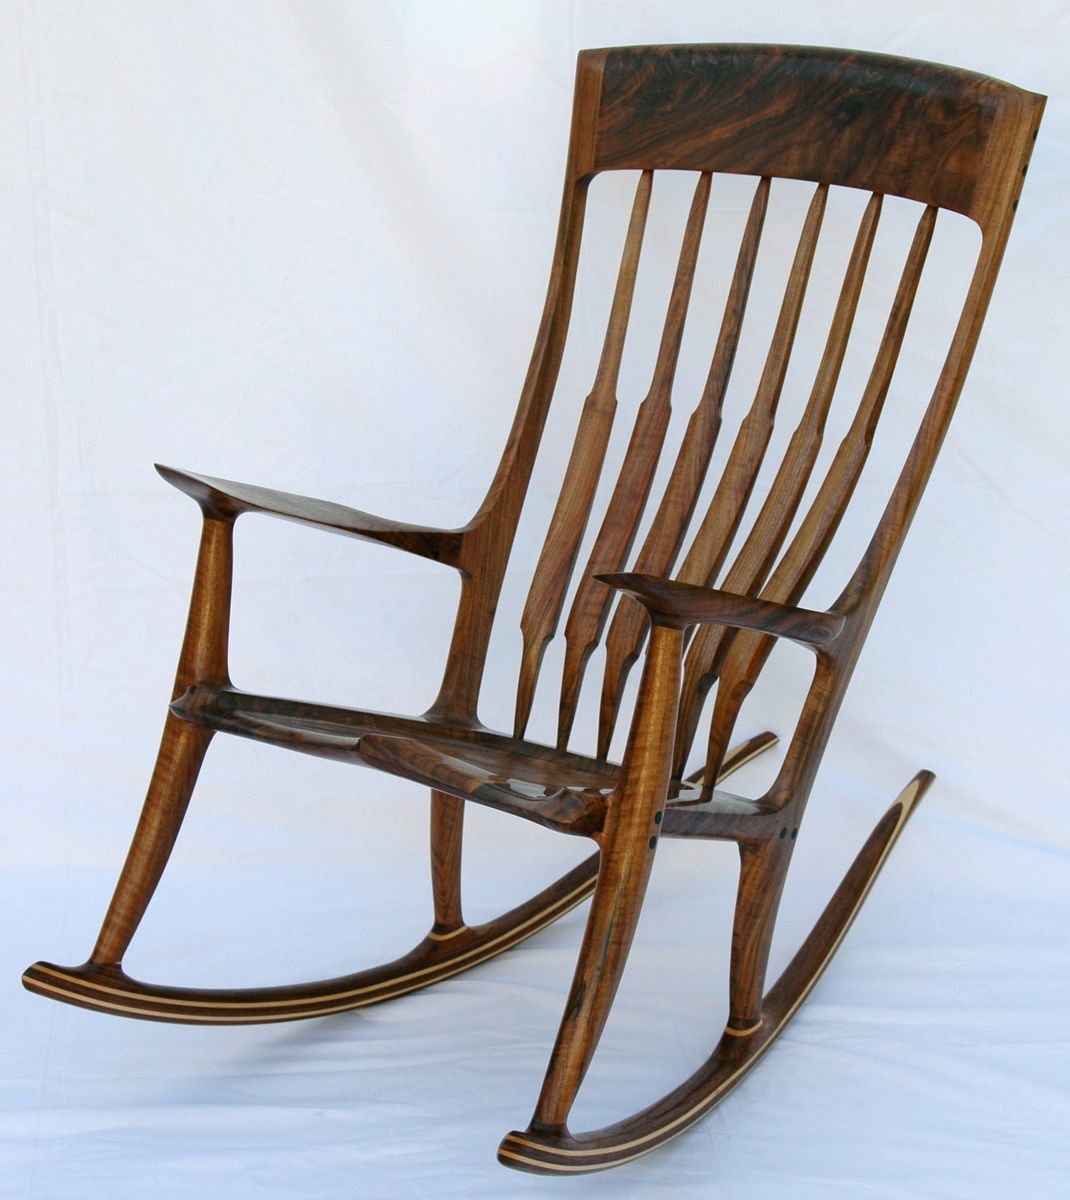 Hand Crafted Figured Walnut Rocking Chair By Ed Rizzardi Woodworker